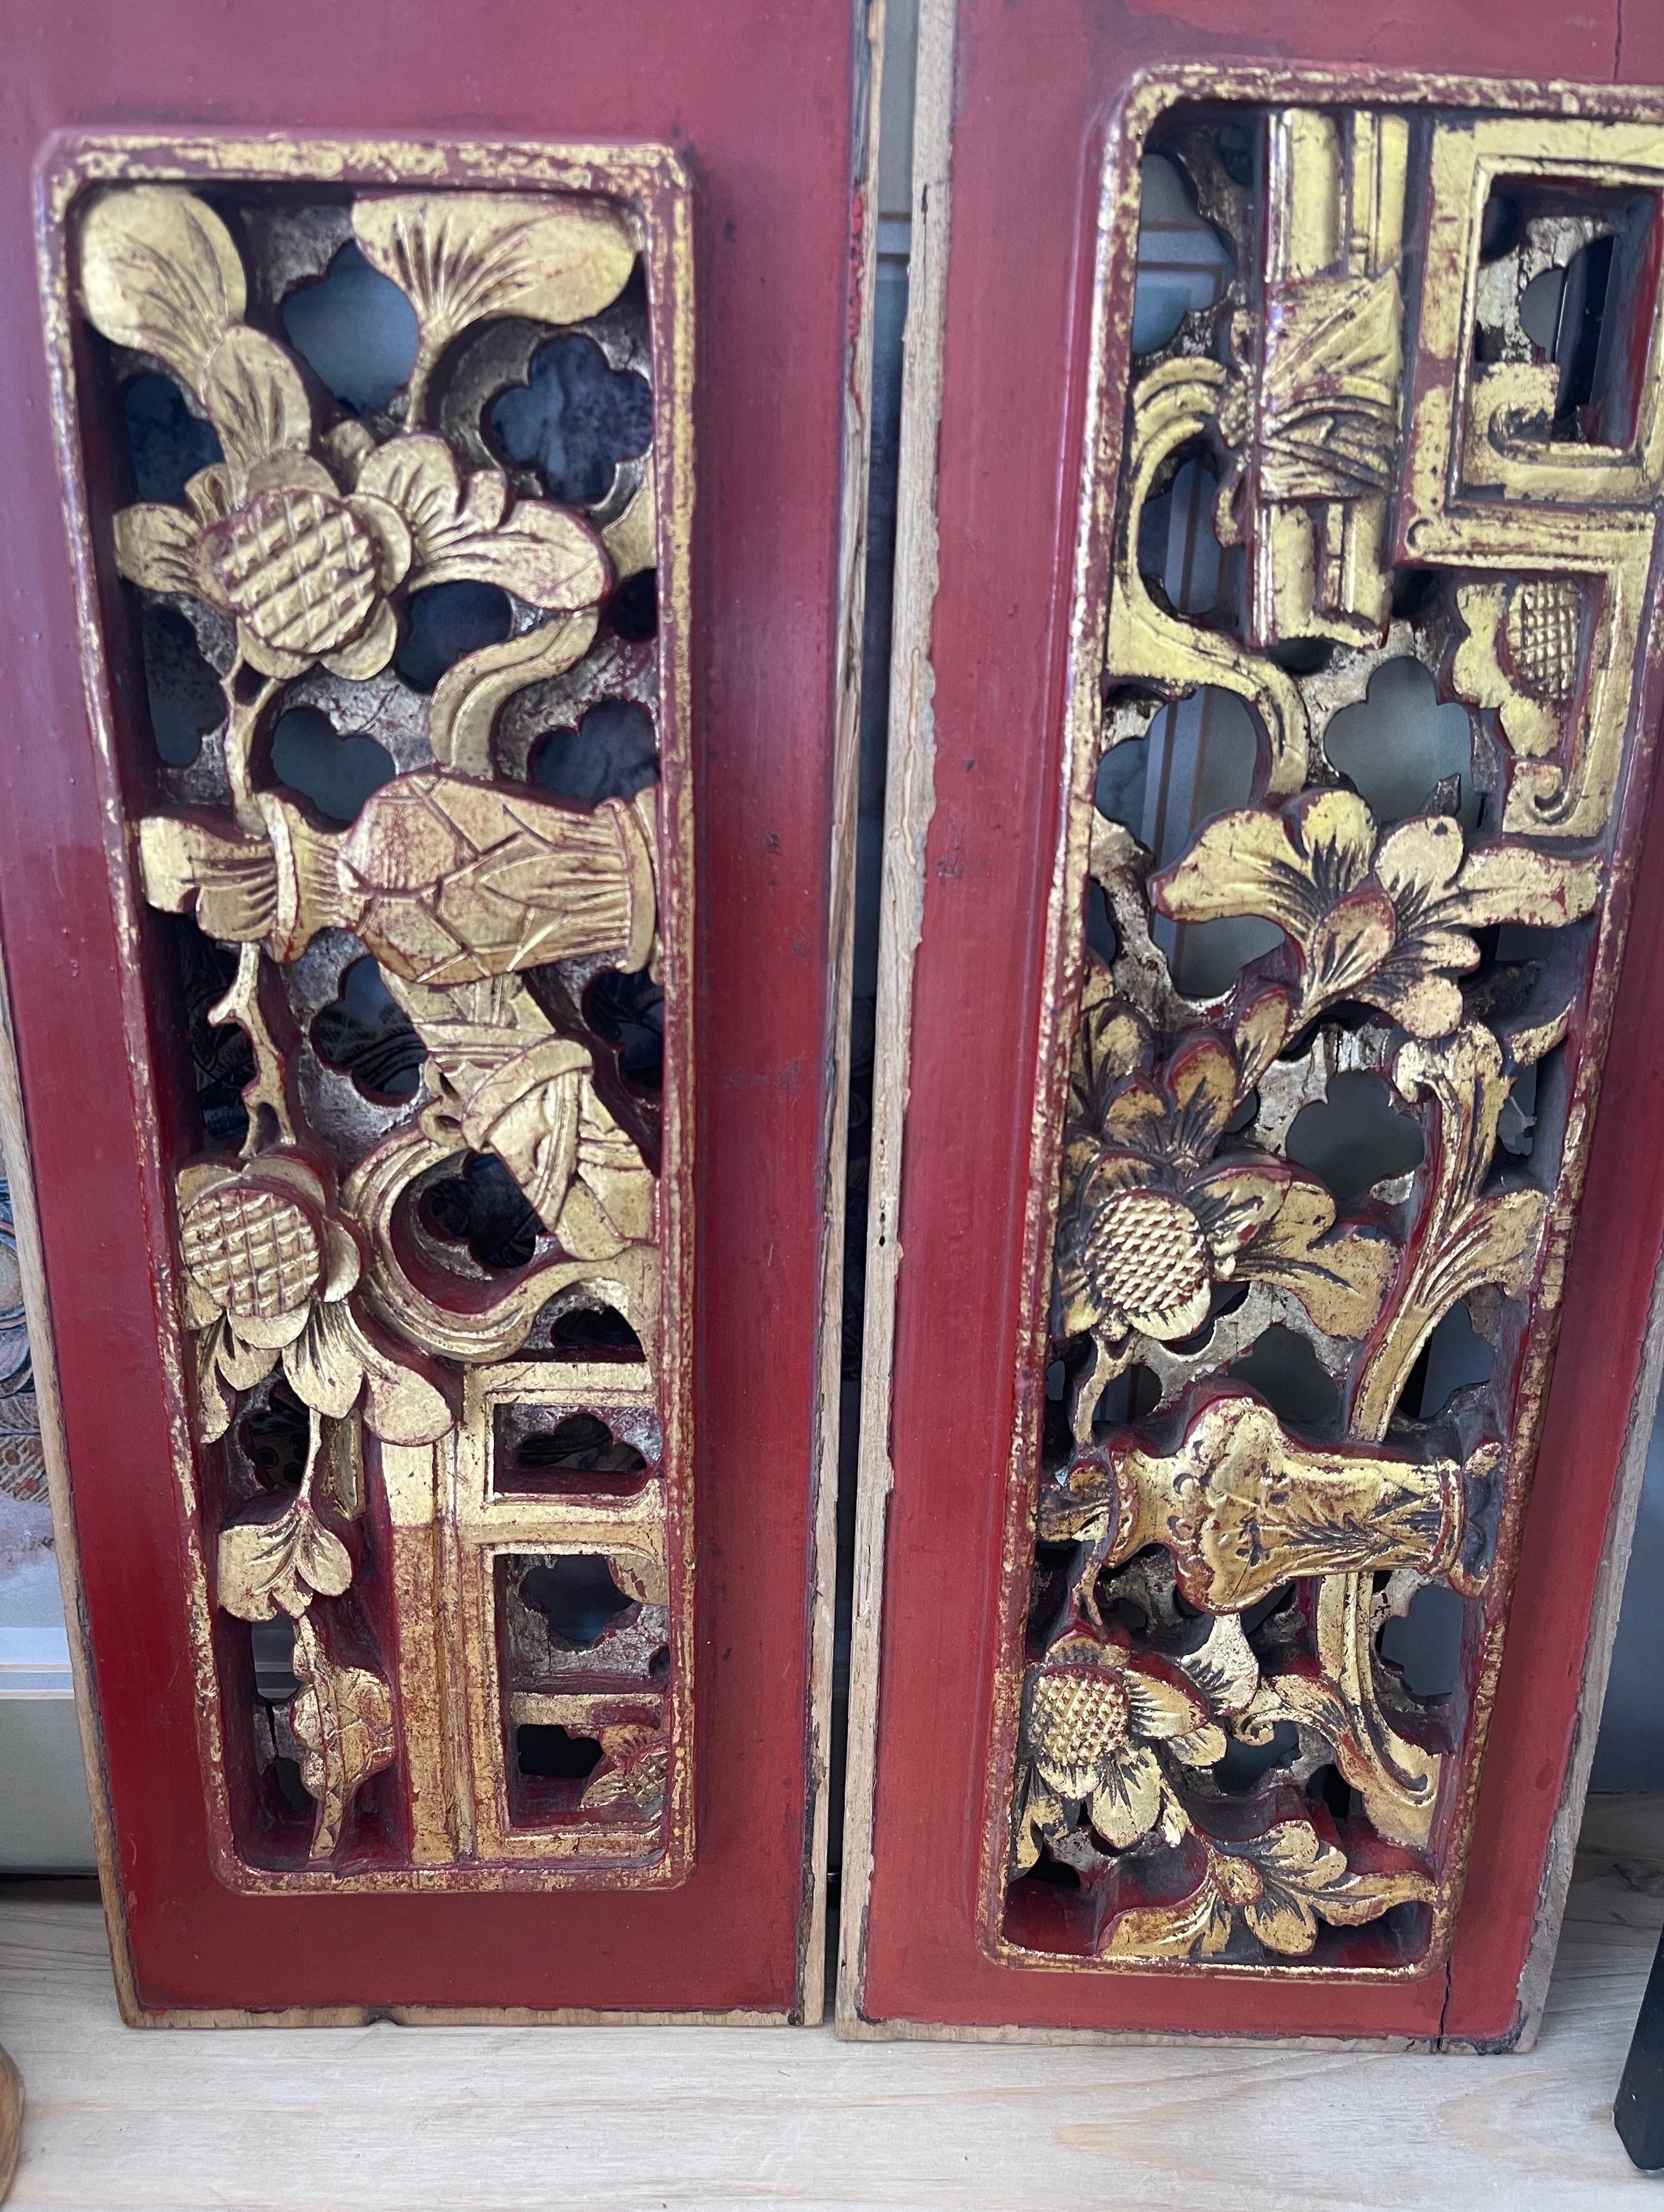 Possibly antique wood panels with intricate hand carving pair

Dimensions. 5 1/2 W ; 1 D ; 15 H.